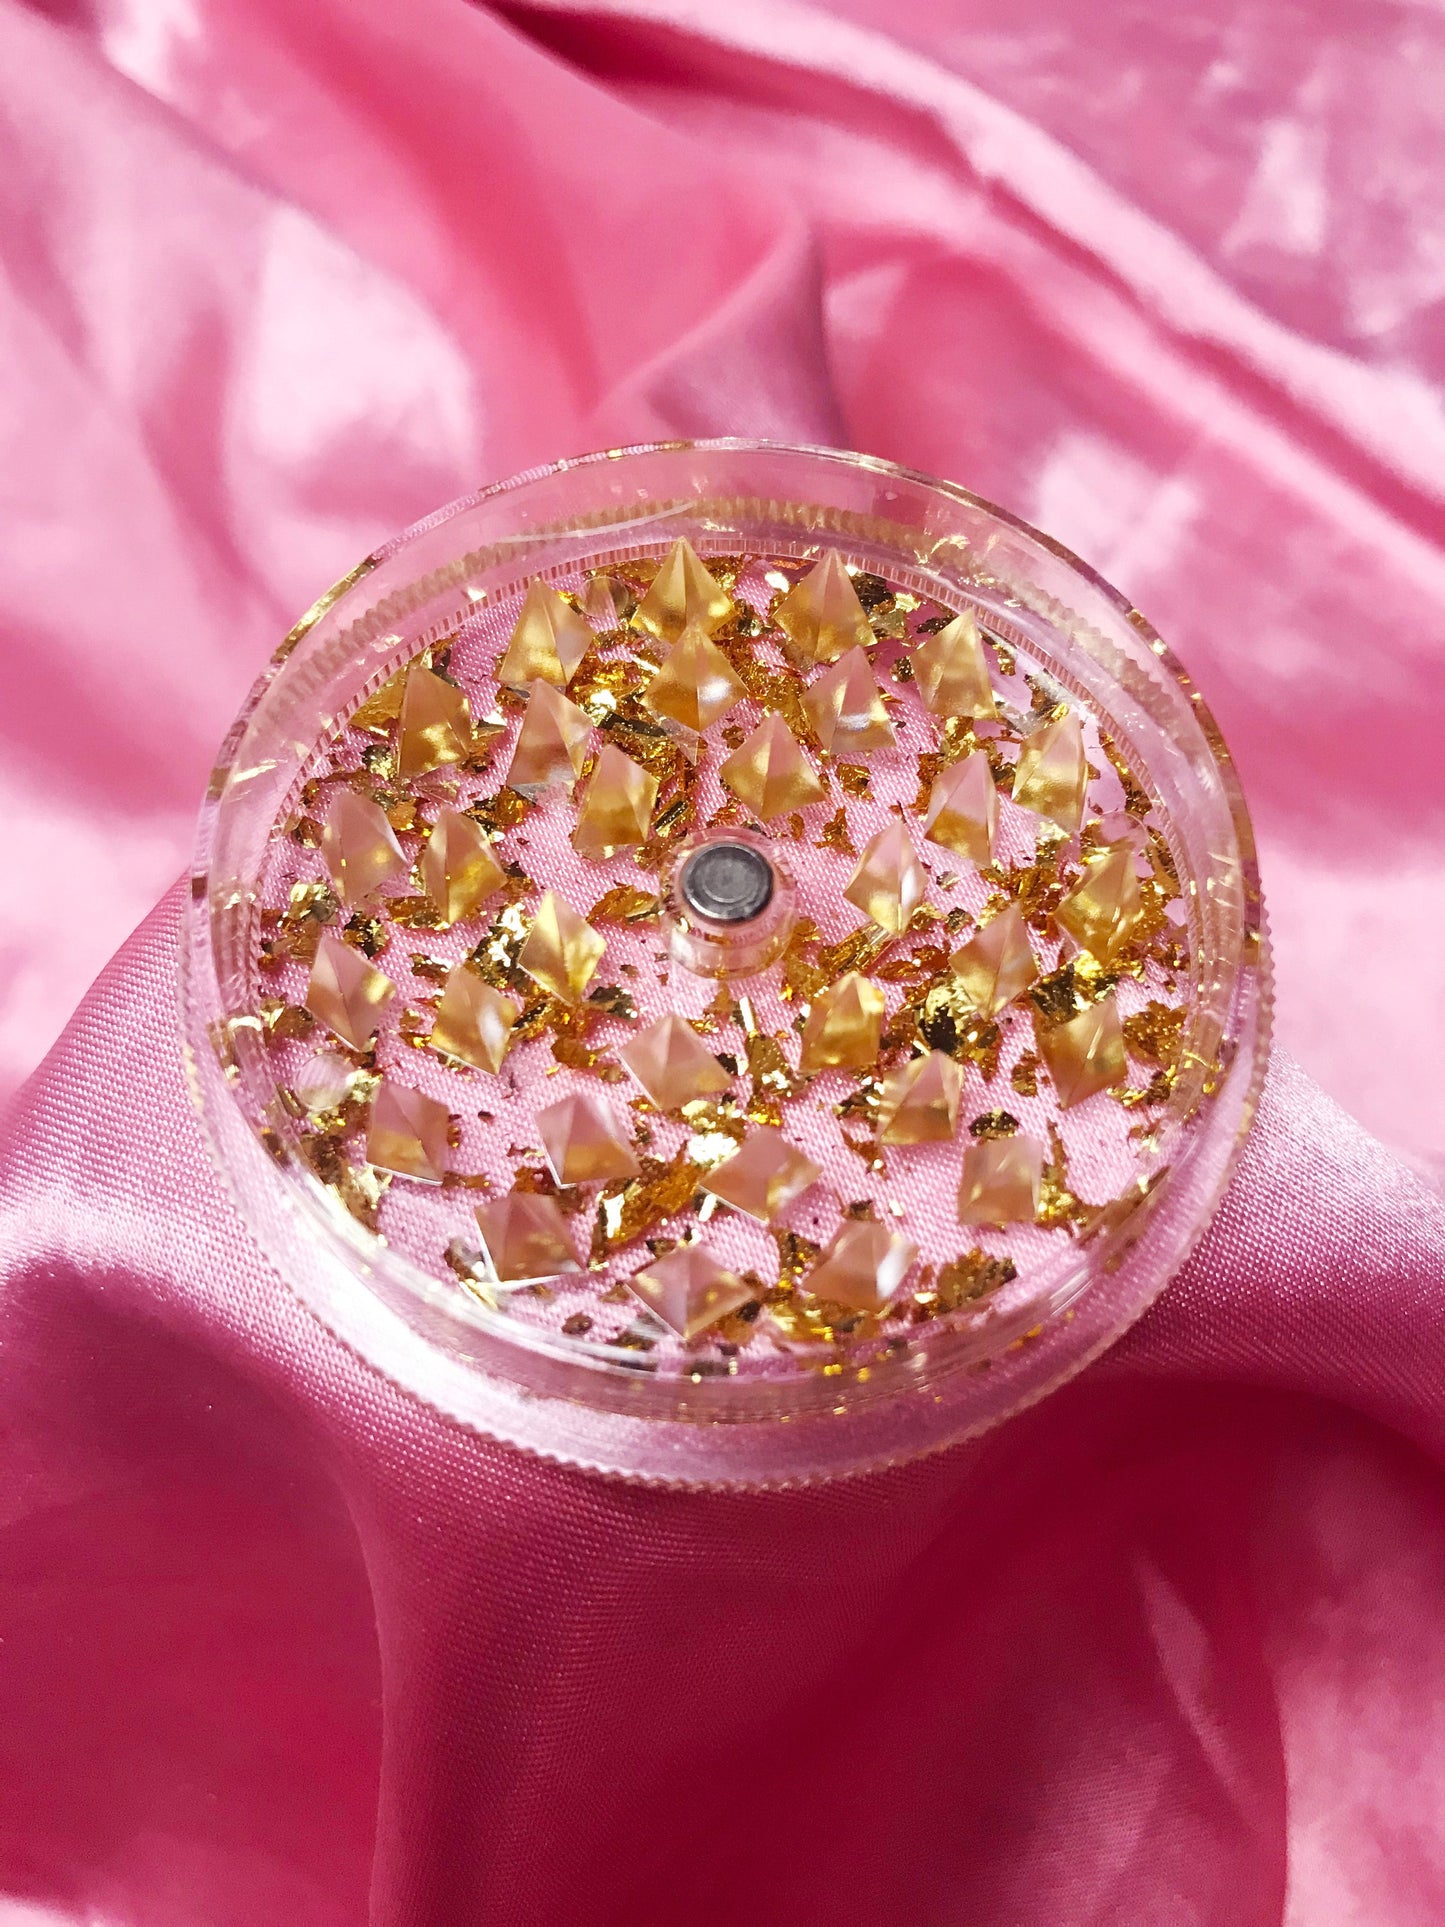 Cute Resin Herb Grinder - Gold and Butterfly Flakes